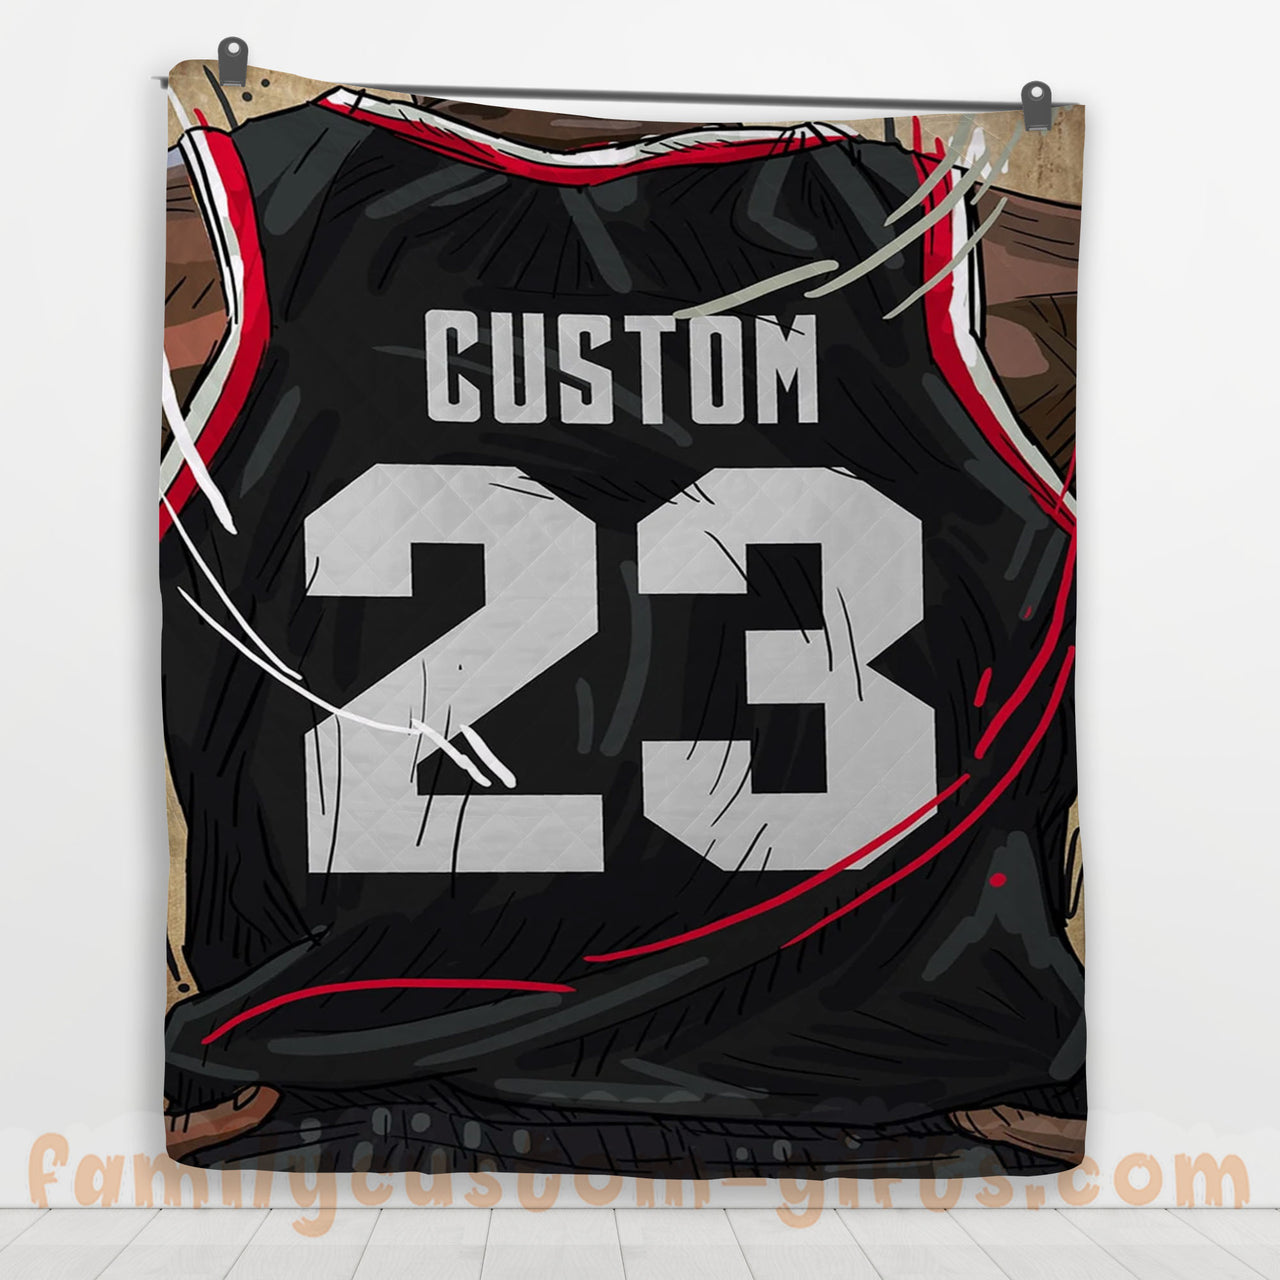 Custom Premium Quilt Blanket Portland Jersey Basketball Personalized Quilt Gifts for Her & Him